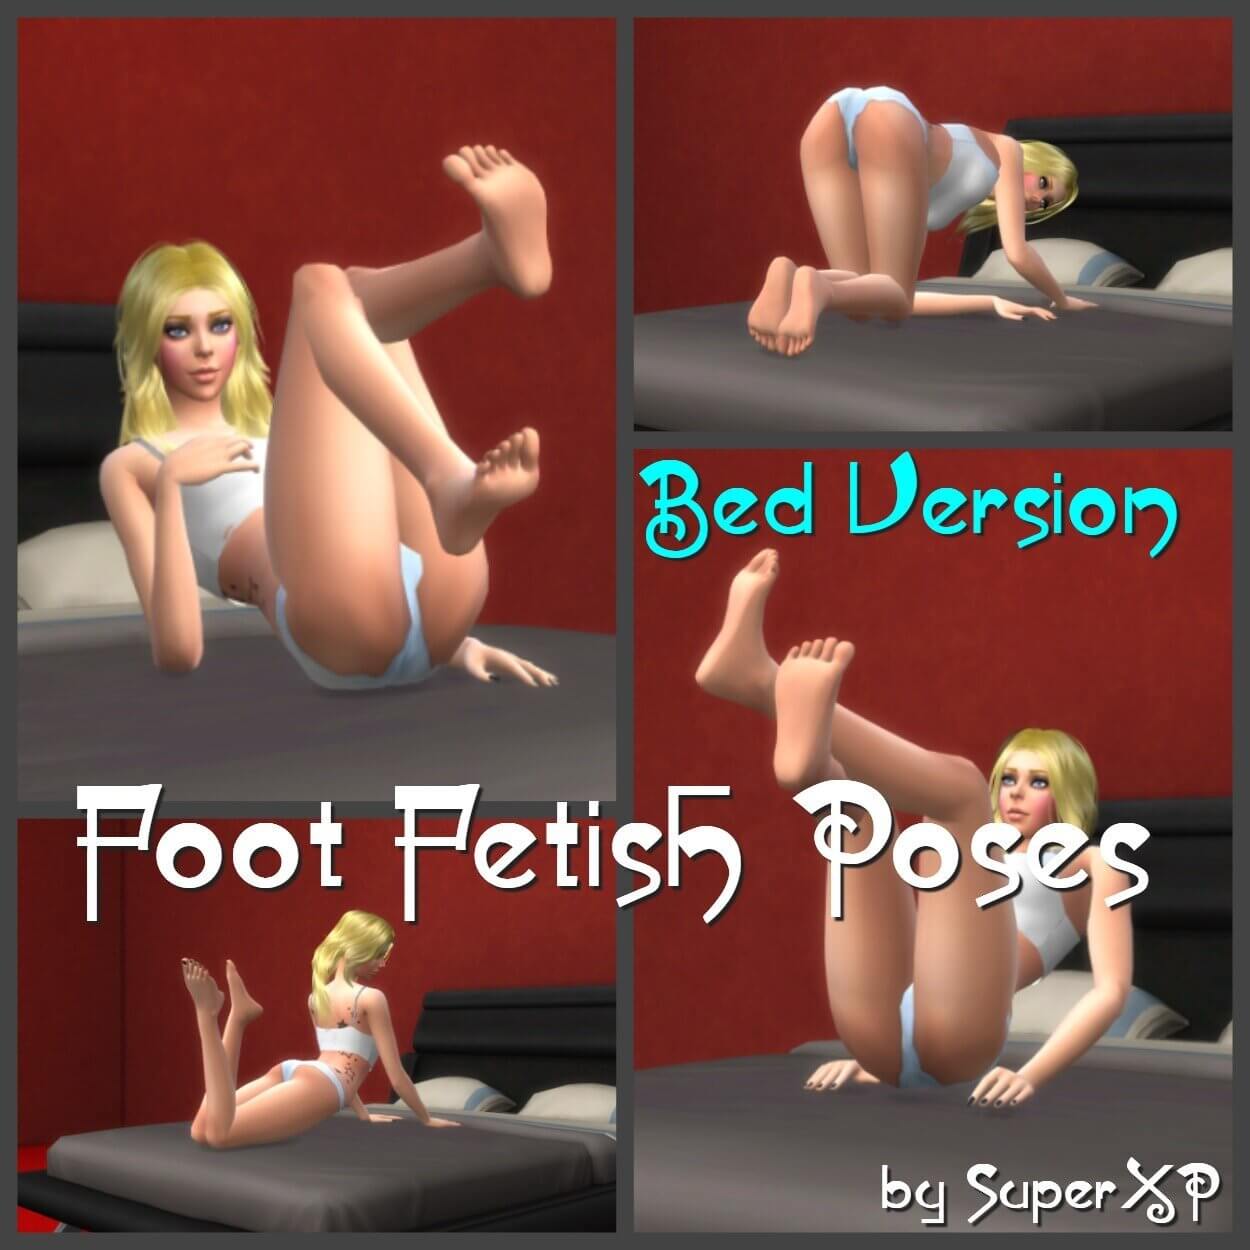 christopher lunnon recommends foot fetish poses pic